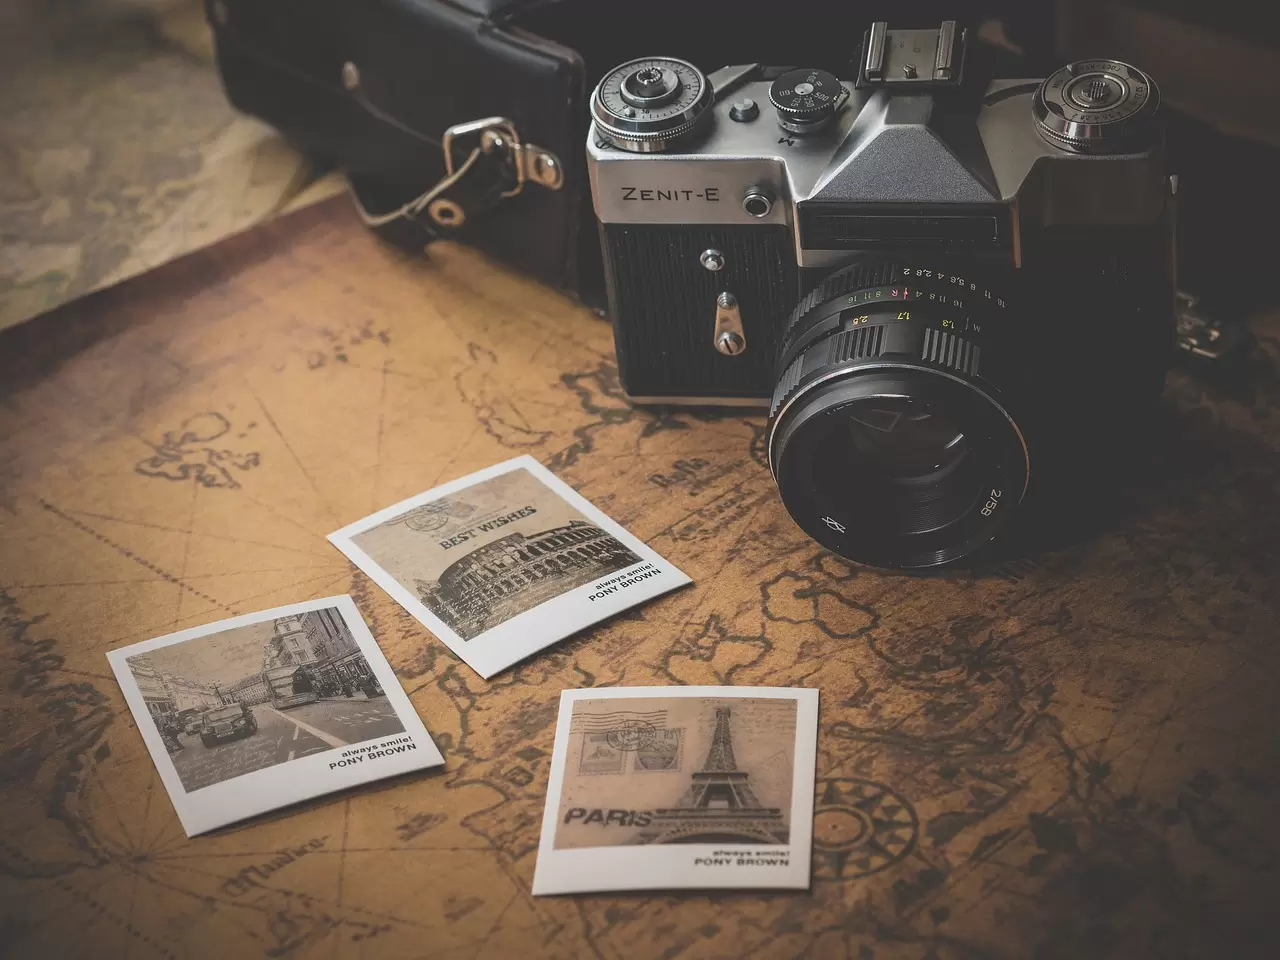 Old map, camera, and photos showing world travel.